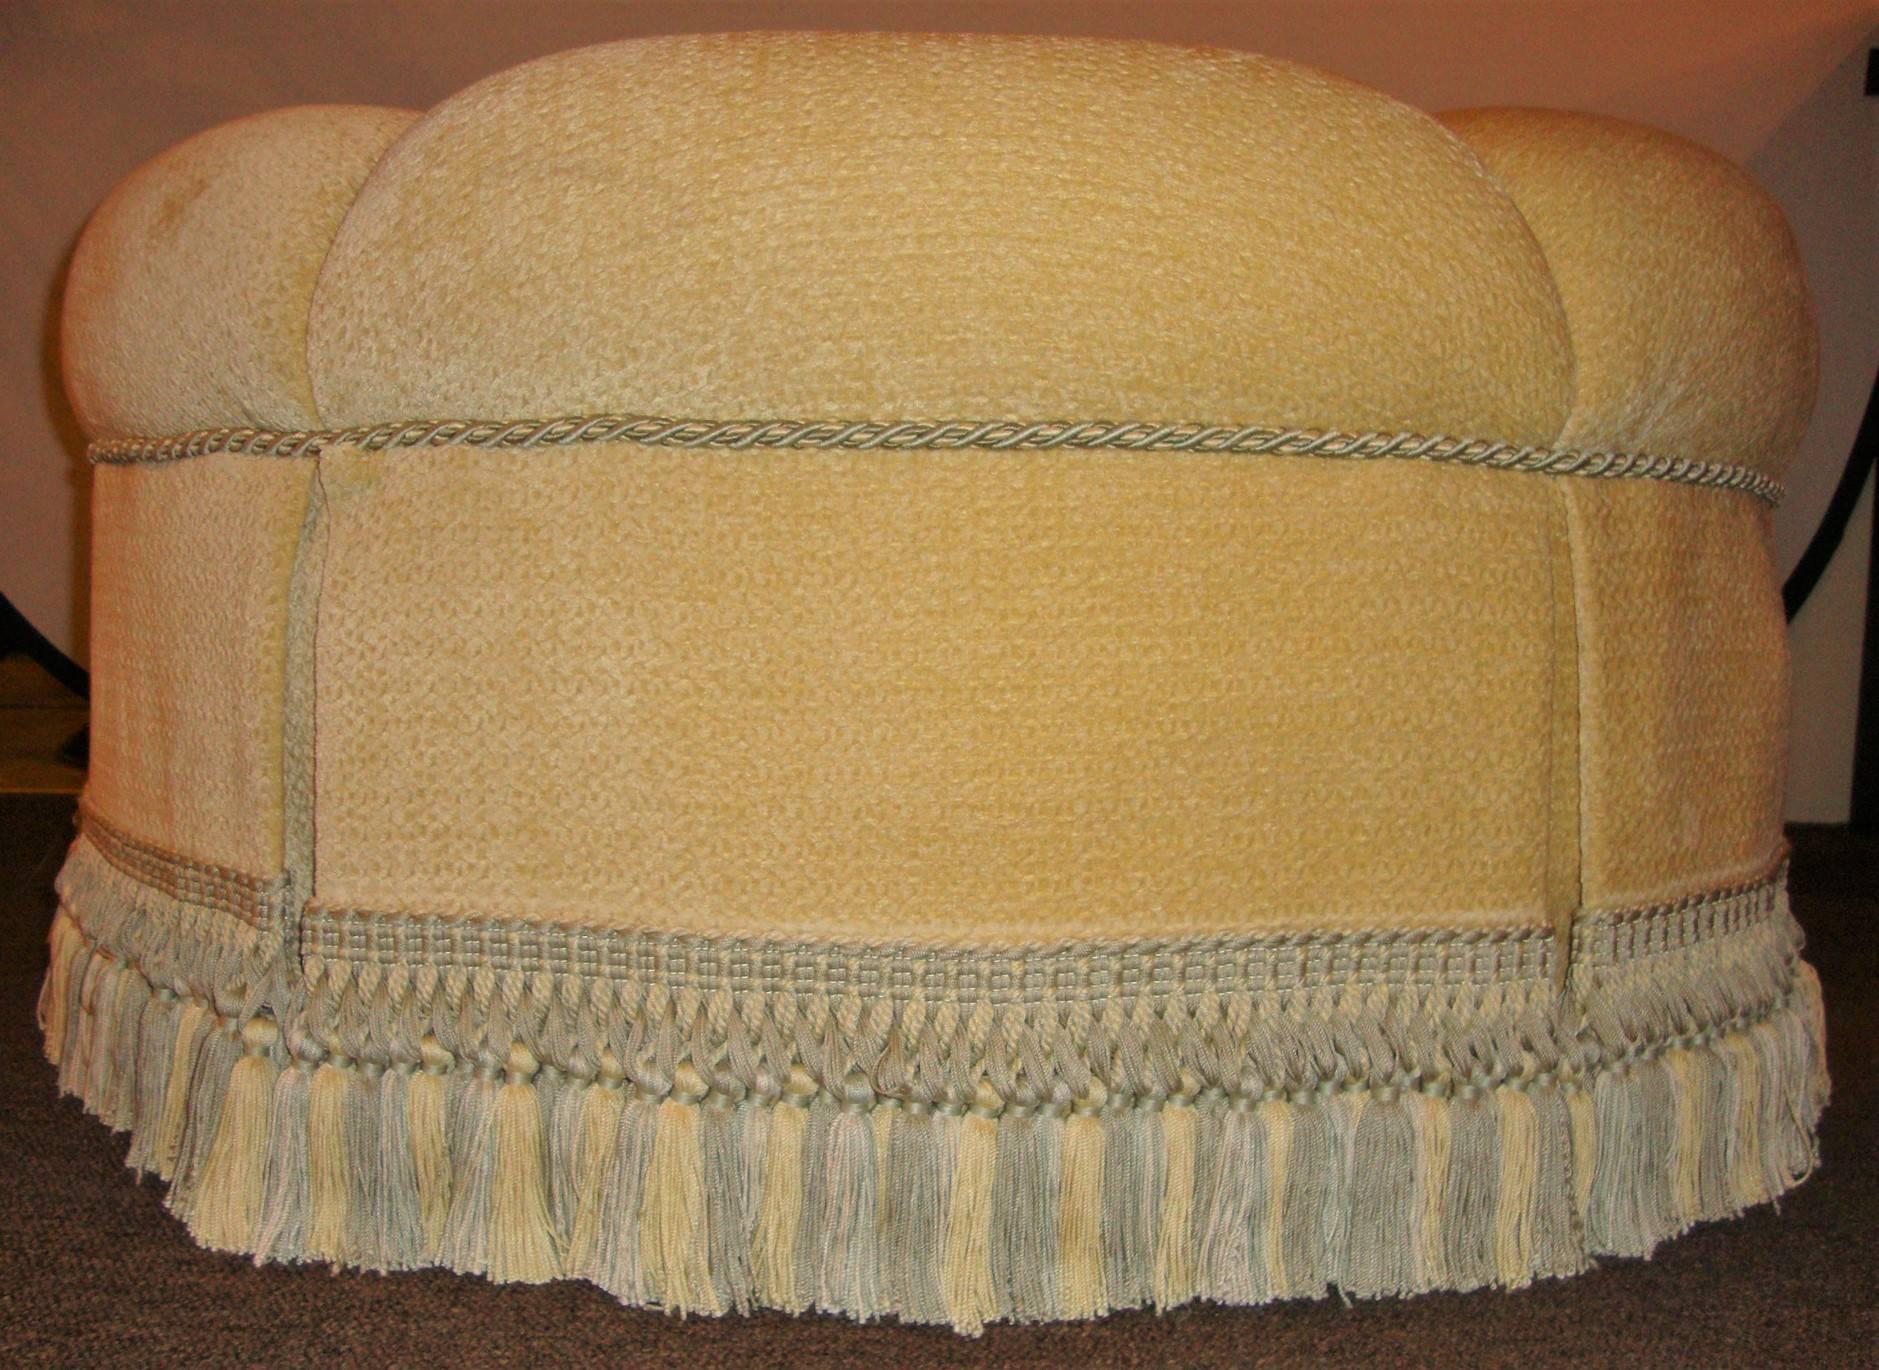 A circular finely upholstered and Lined ottoman with a tassel fringe base. Hollywood Regency at its finest.